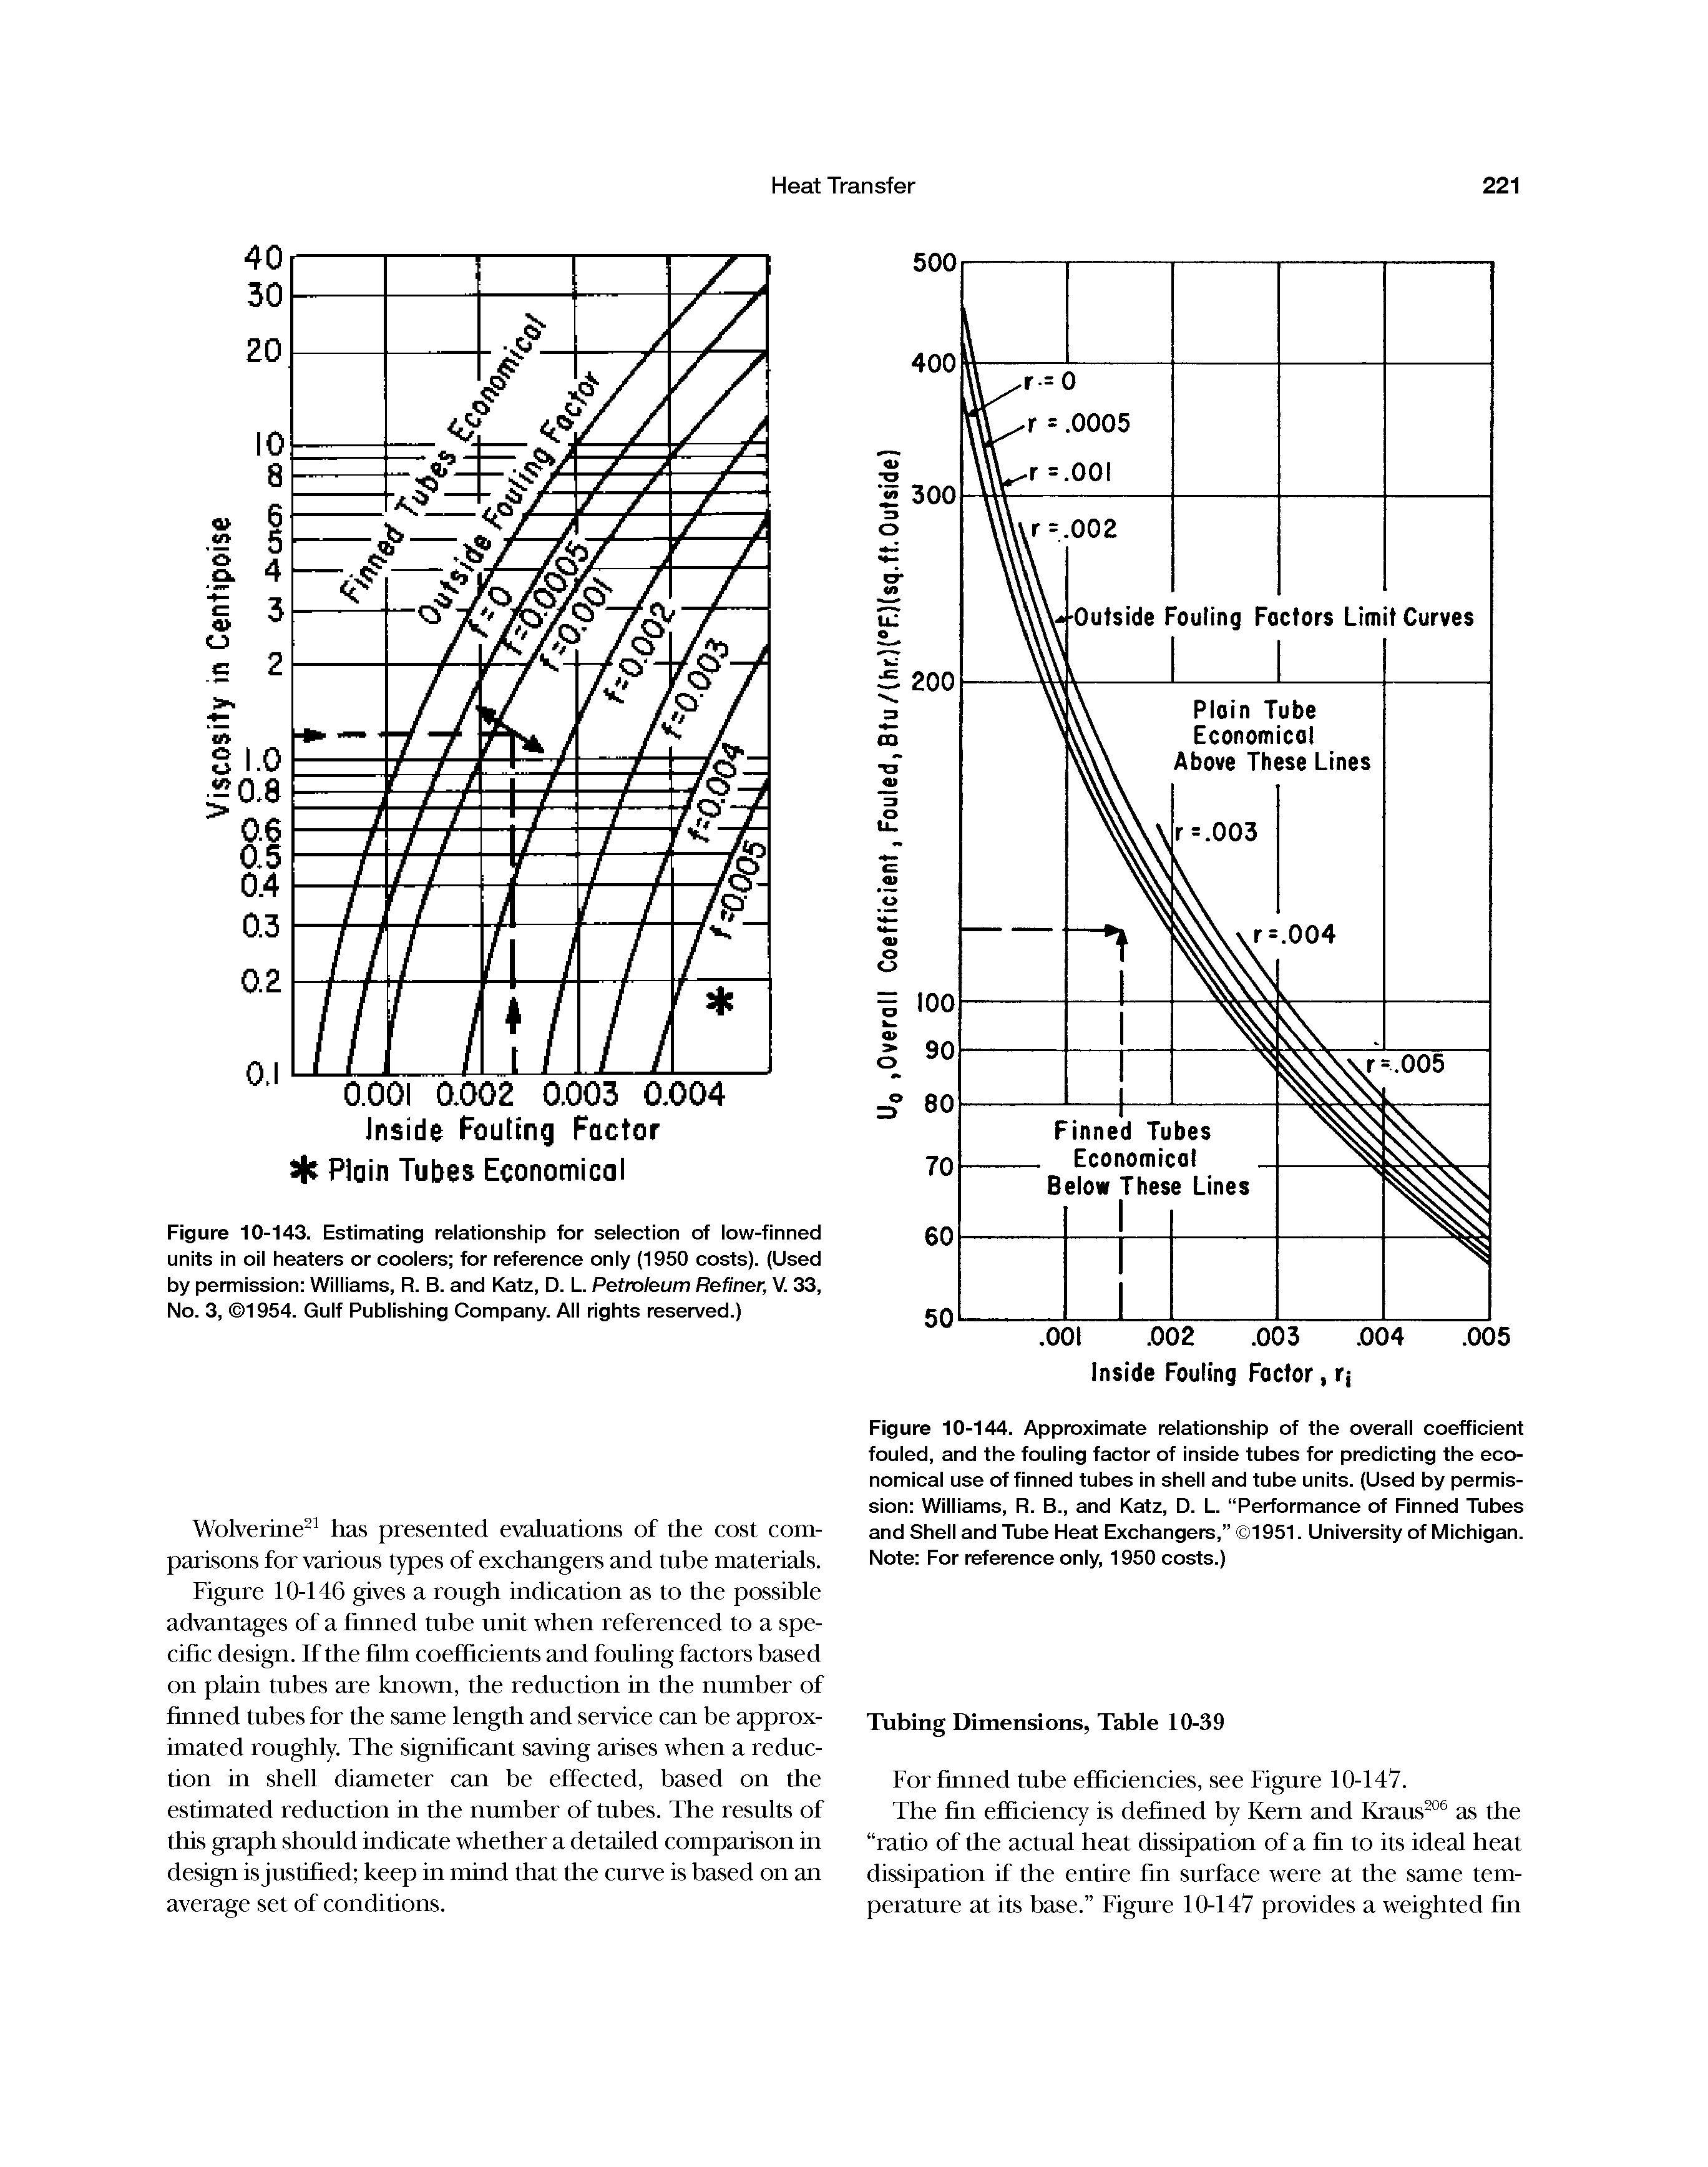 Figure 10-144. Approximate relationship of the overall coefficient fouled, and the fouling factor of inside tubes for predicting the economical use of finned tubes in shell and tube units. (Used by permission Williams, R. B., and Katz, D. L. Performance of Finned Tubes and Shell and Tube Heat Exchangers, 1951. University of Michigan. Note For reference only, 1950 costs.)...